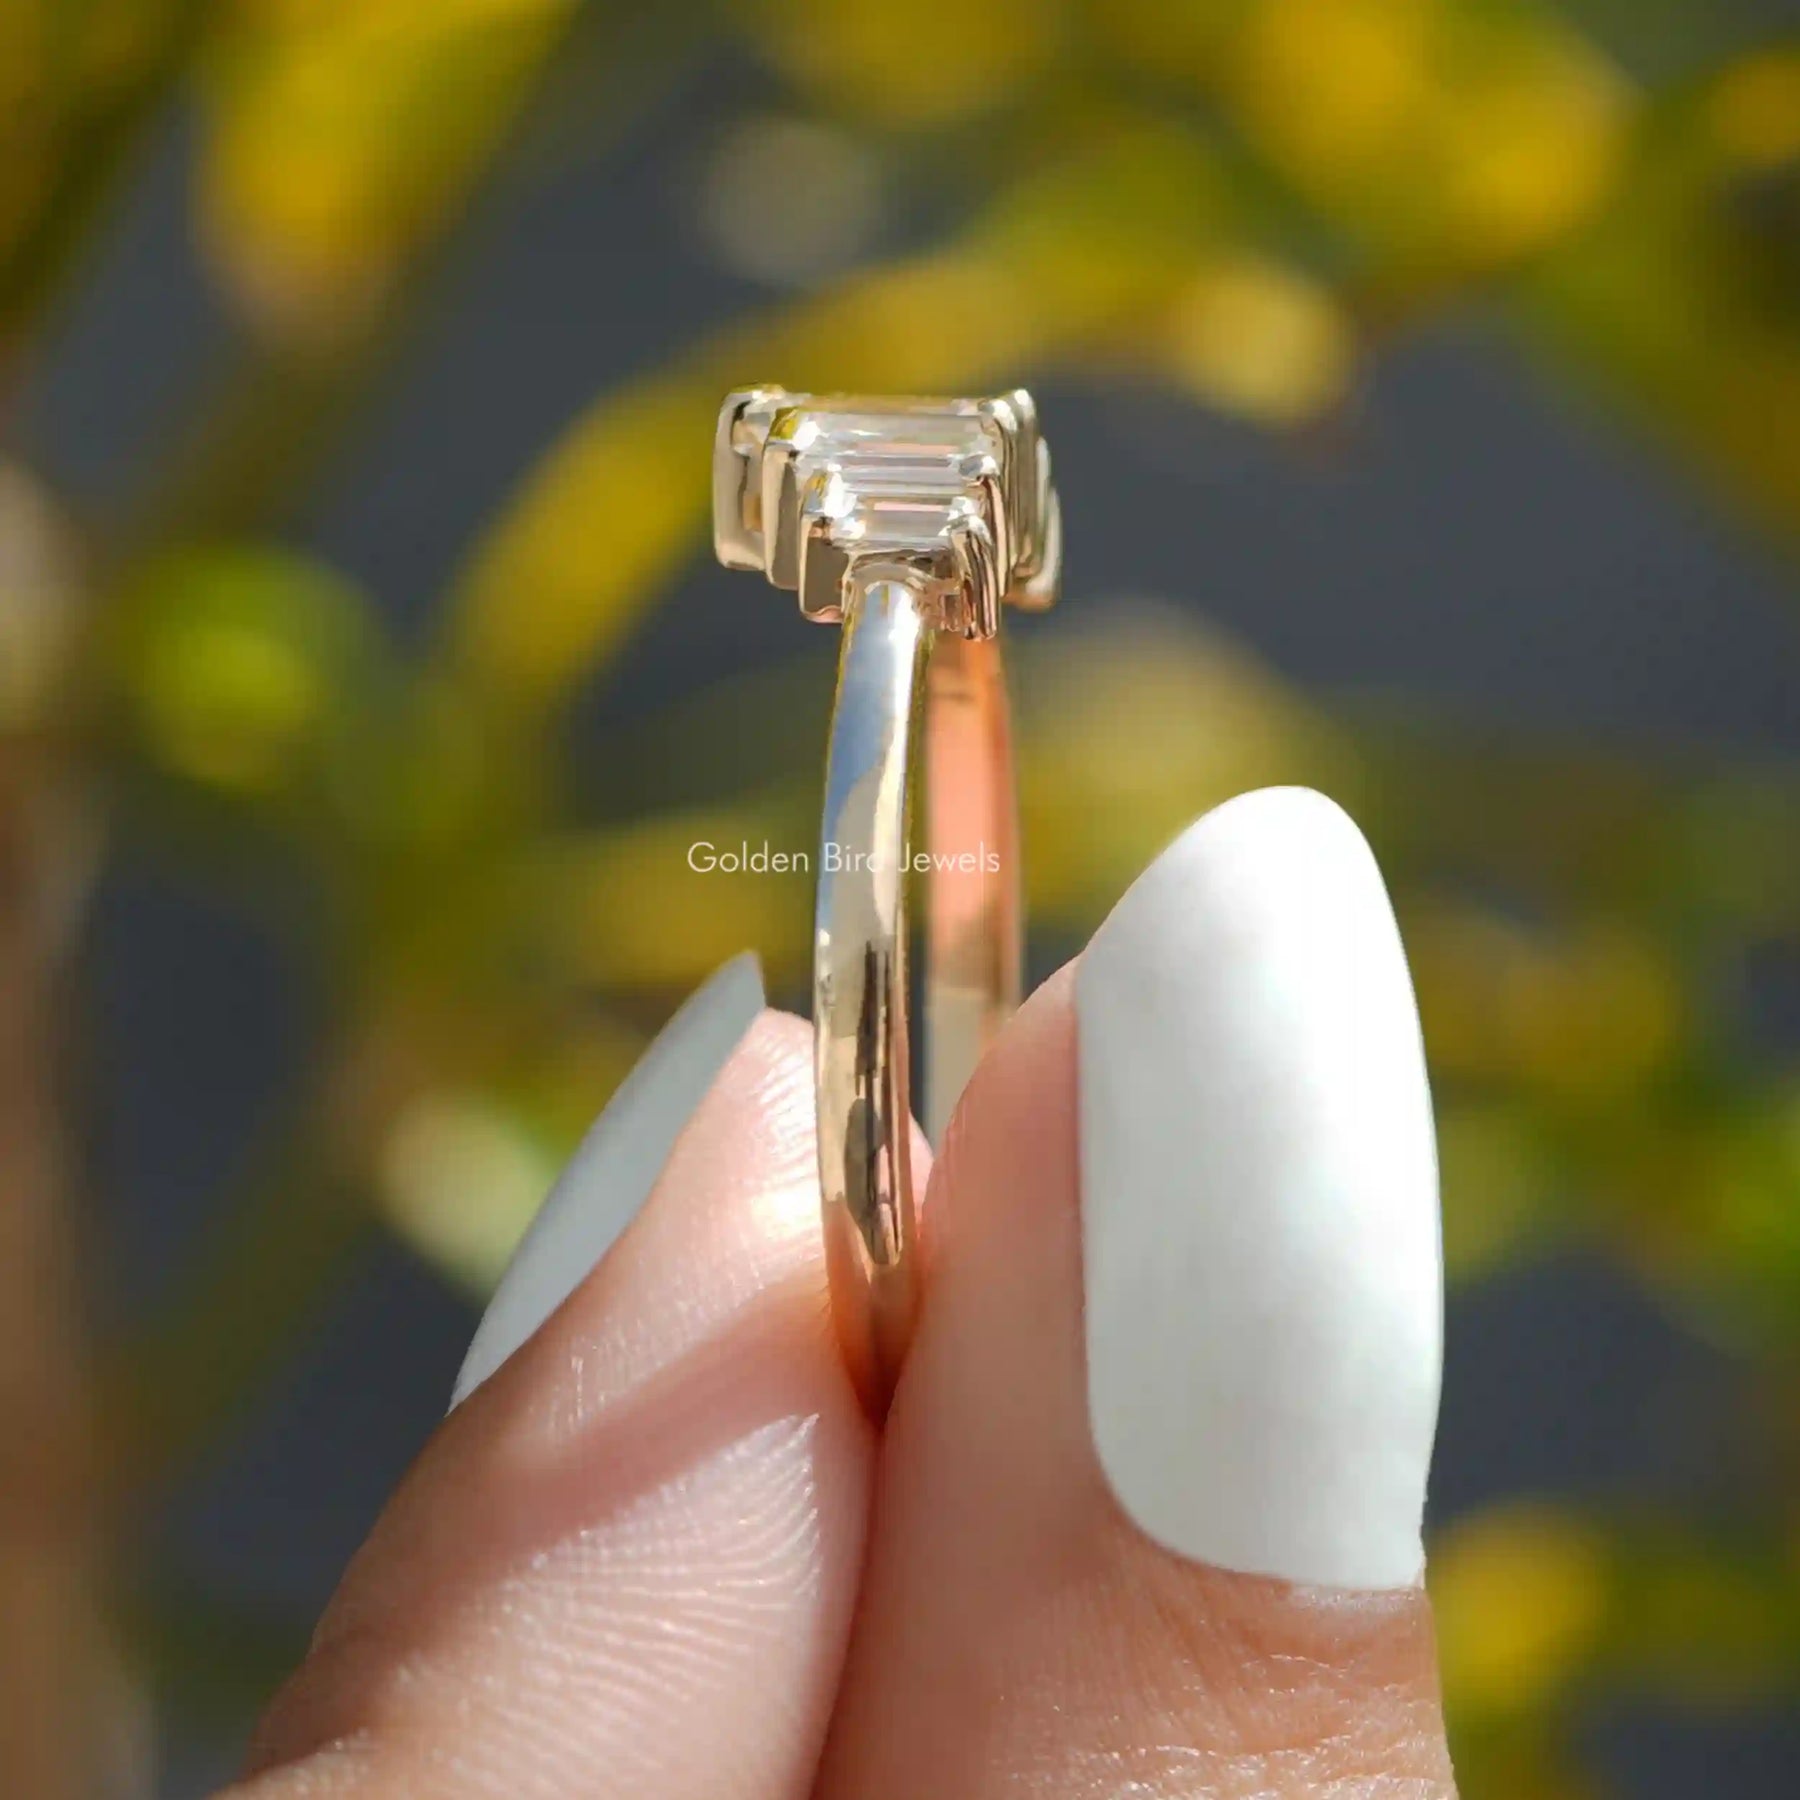 [In Finger a Solid Gold Moissanite Wedding Ring]-[Golden Bird Jewels]